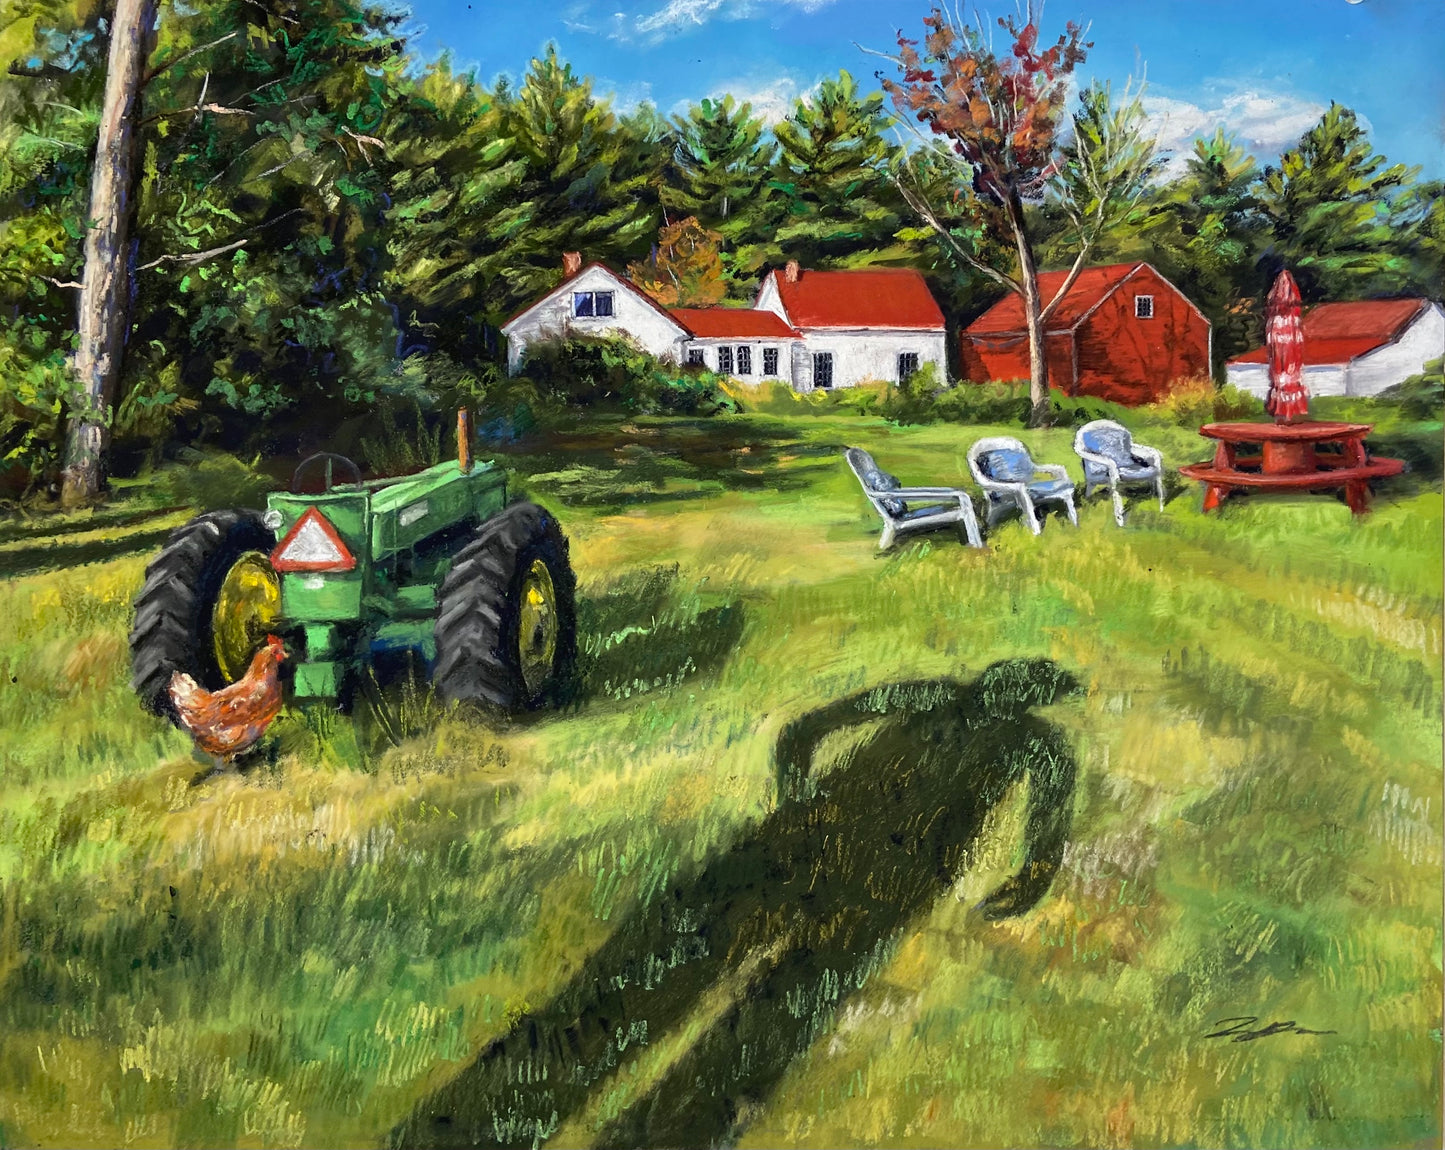 "In Between The Field And The Farm" Print